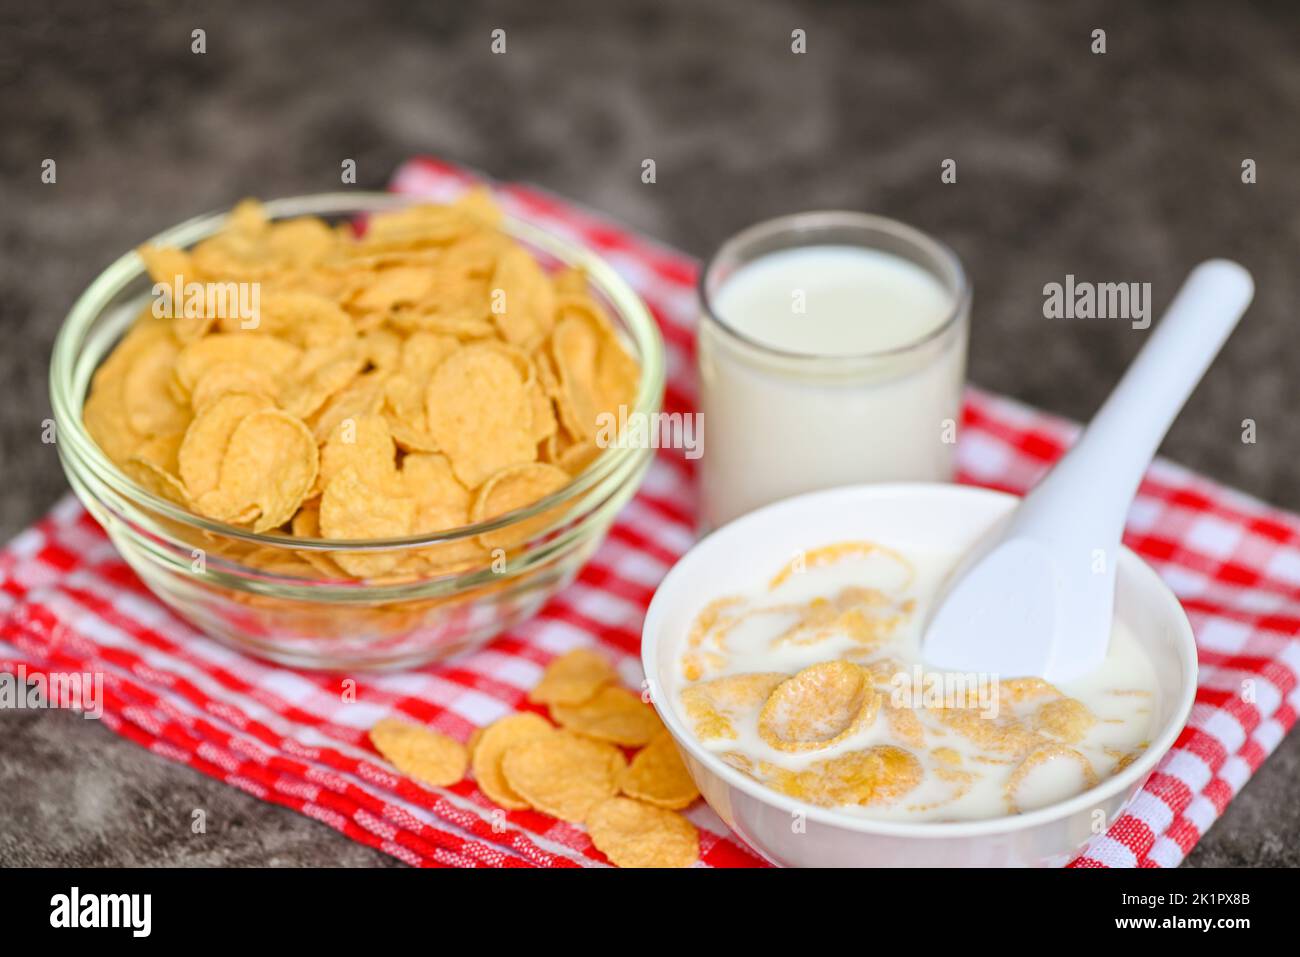 cornflakes bowl breakfast food and snack for healthy food concept, morning breakfast fresh whole grain cereal, cornflakes with milk on dark background Stock Photo